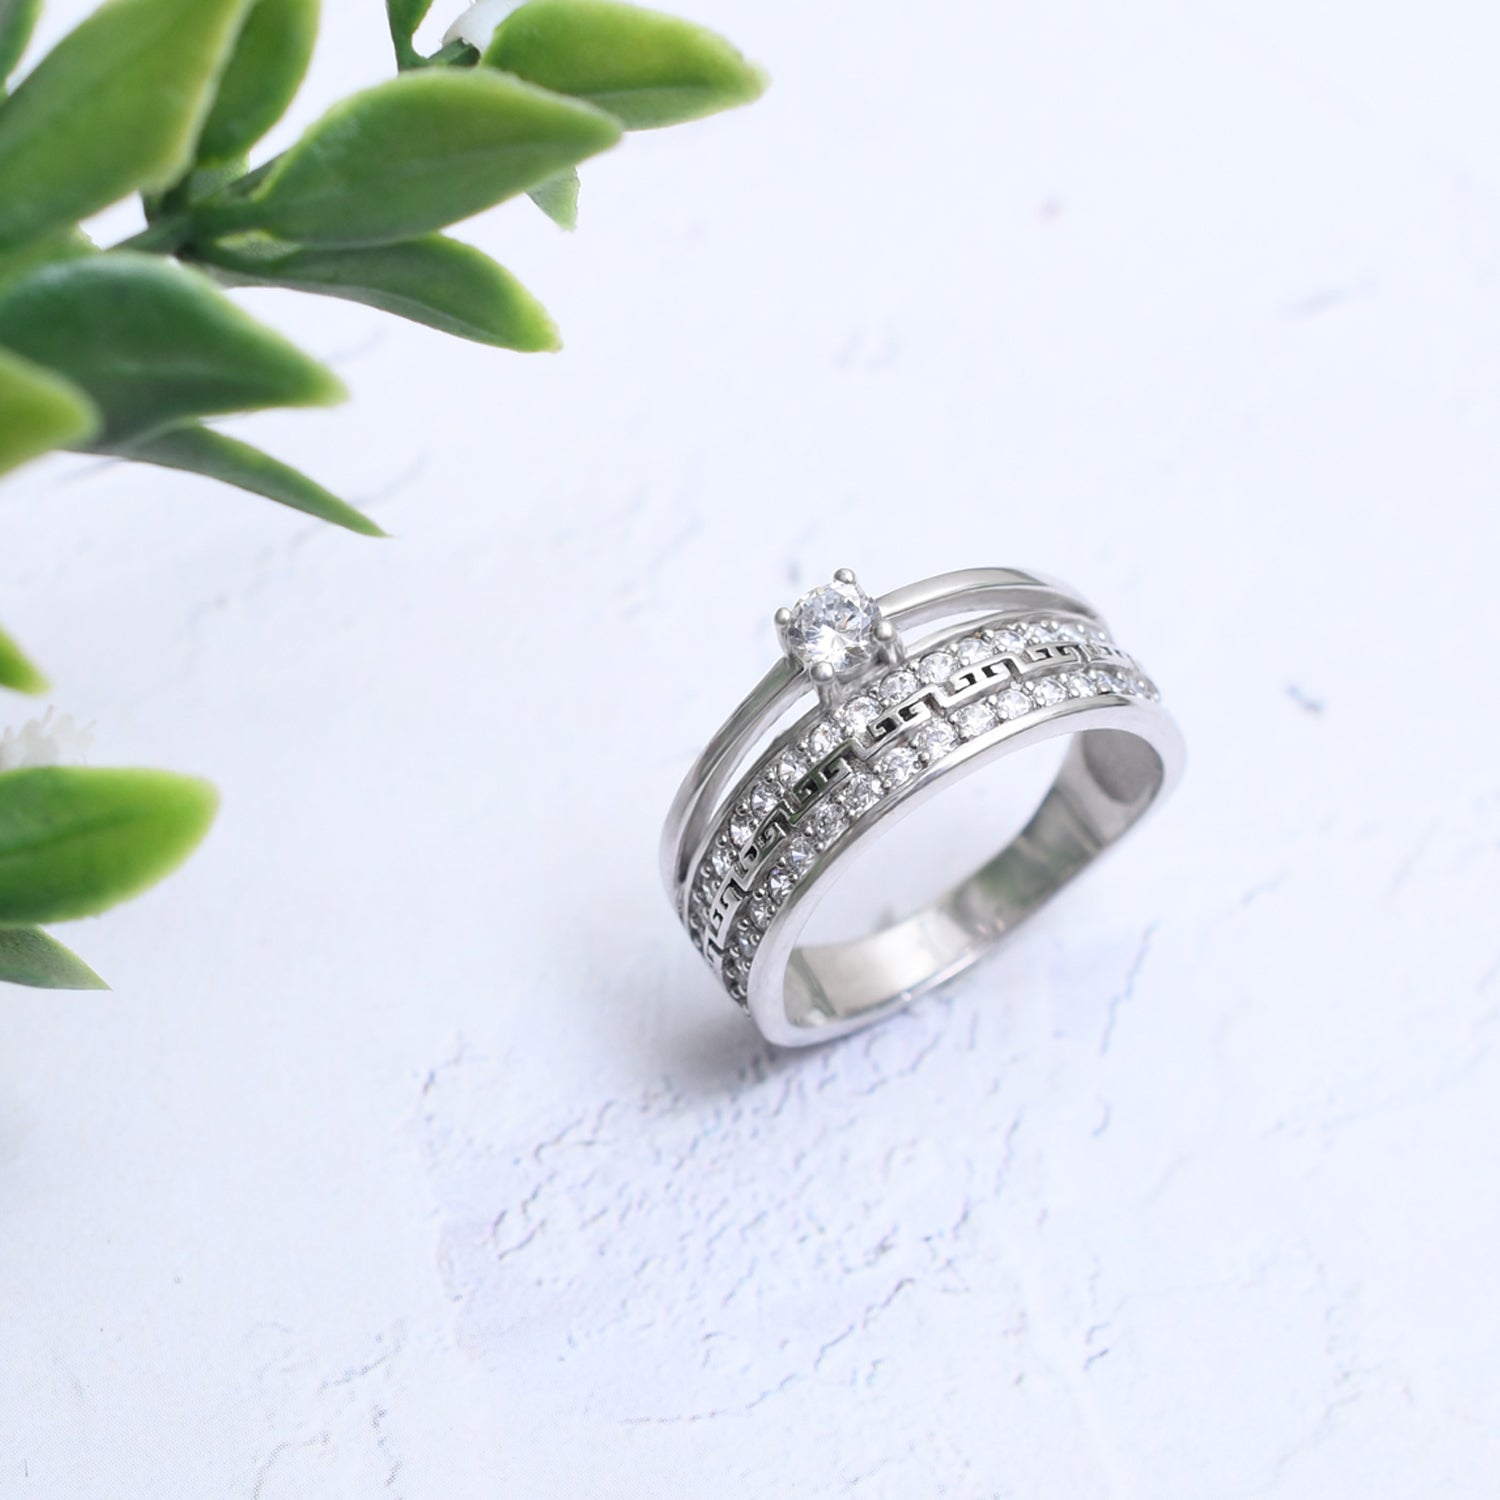 Silver Little Solitaire and Sparkling Extended Band Ring